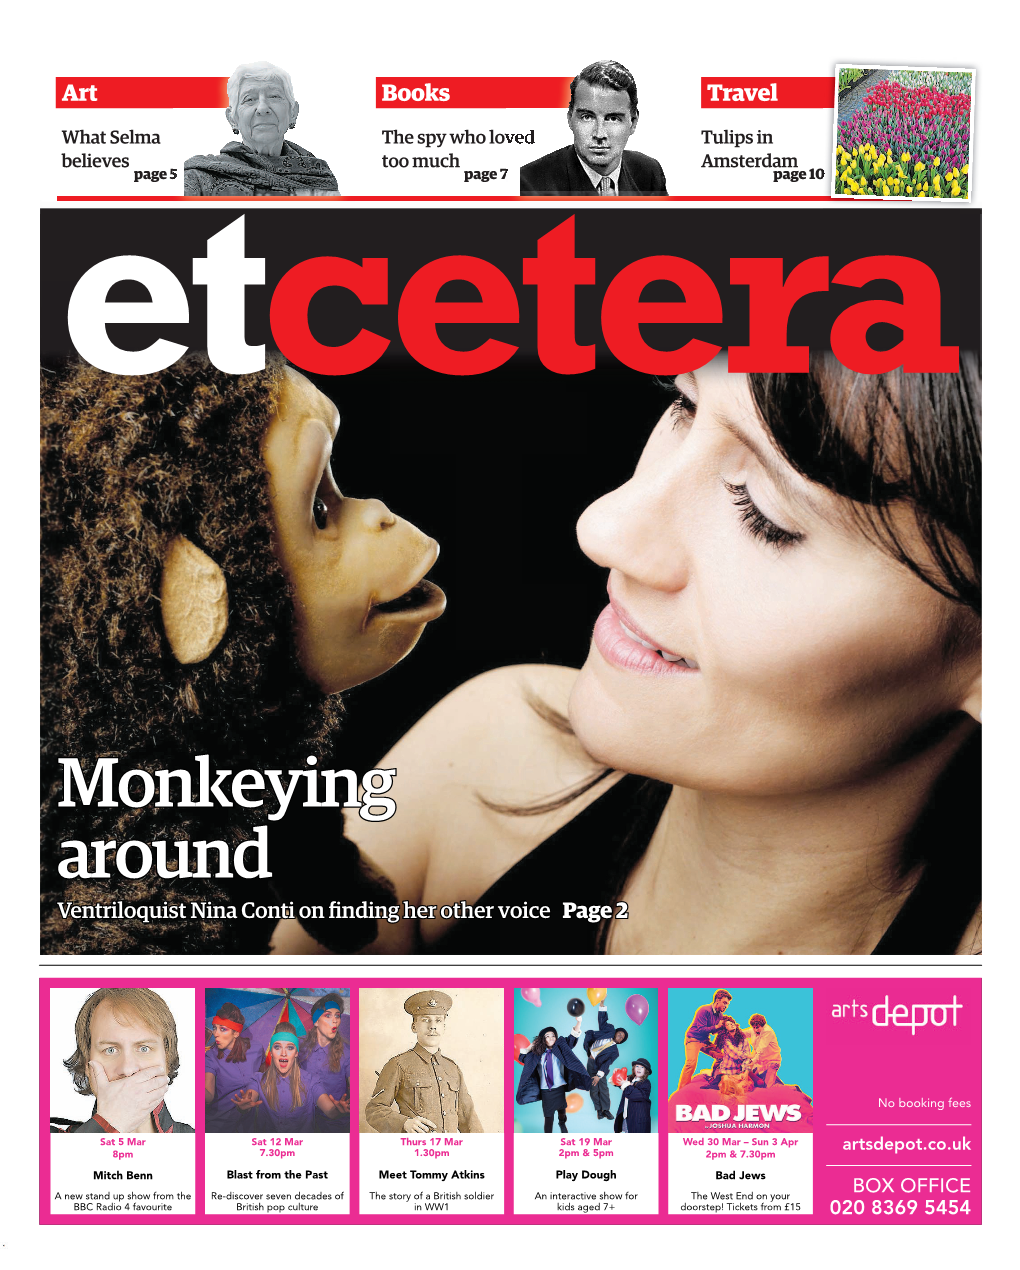 Monkeying Around Ventriloquist Nina Conti on Finding Her Other Voice Page 2